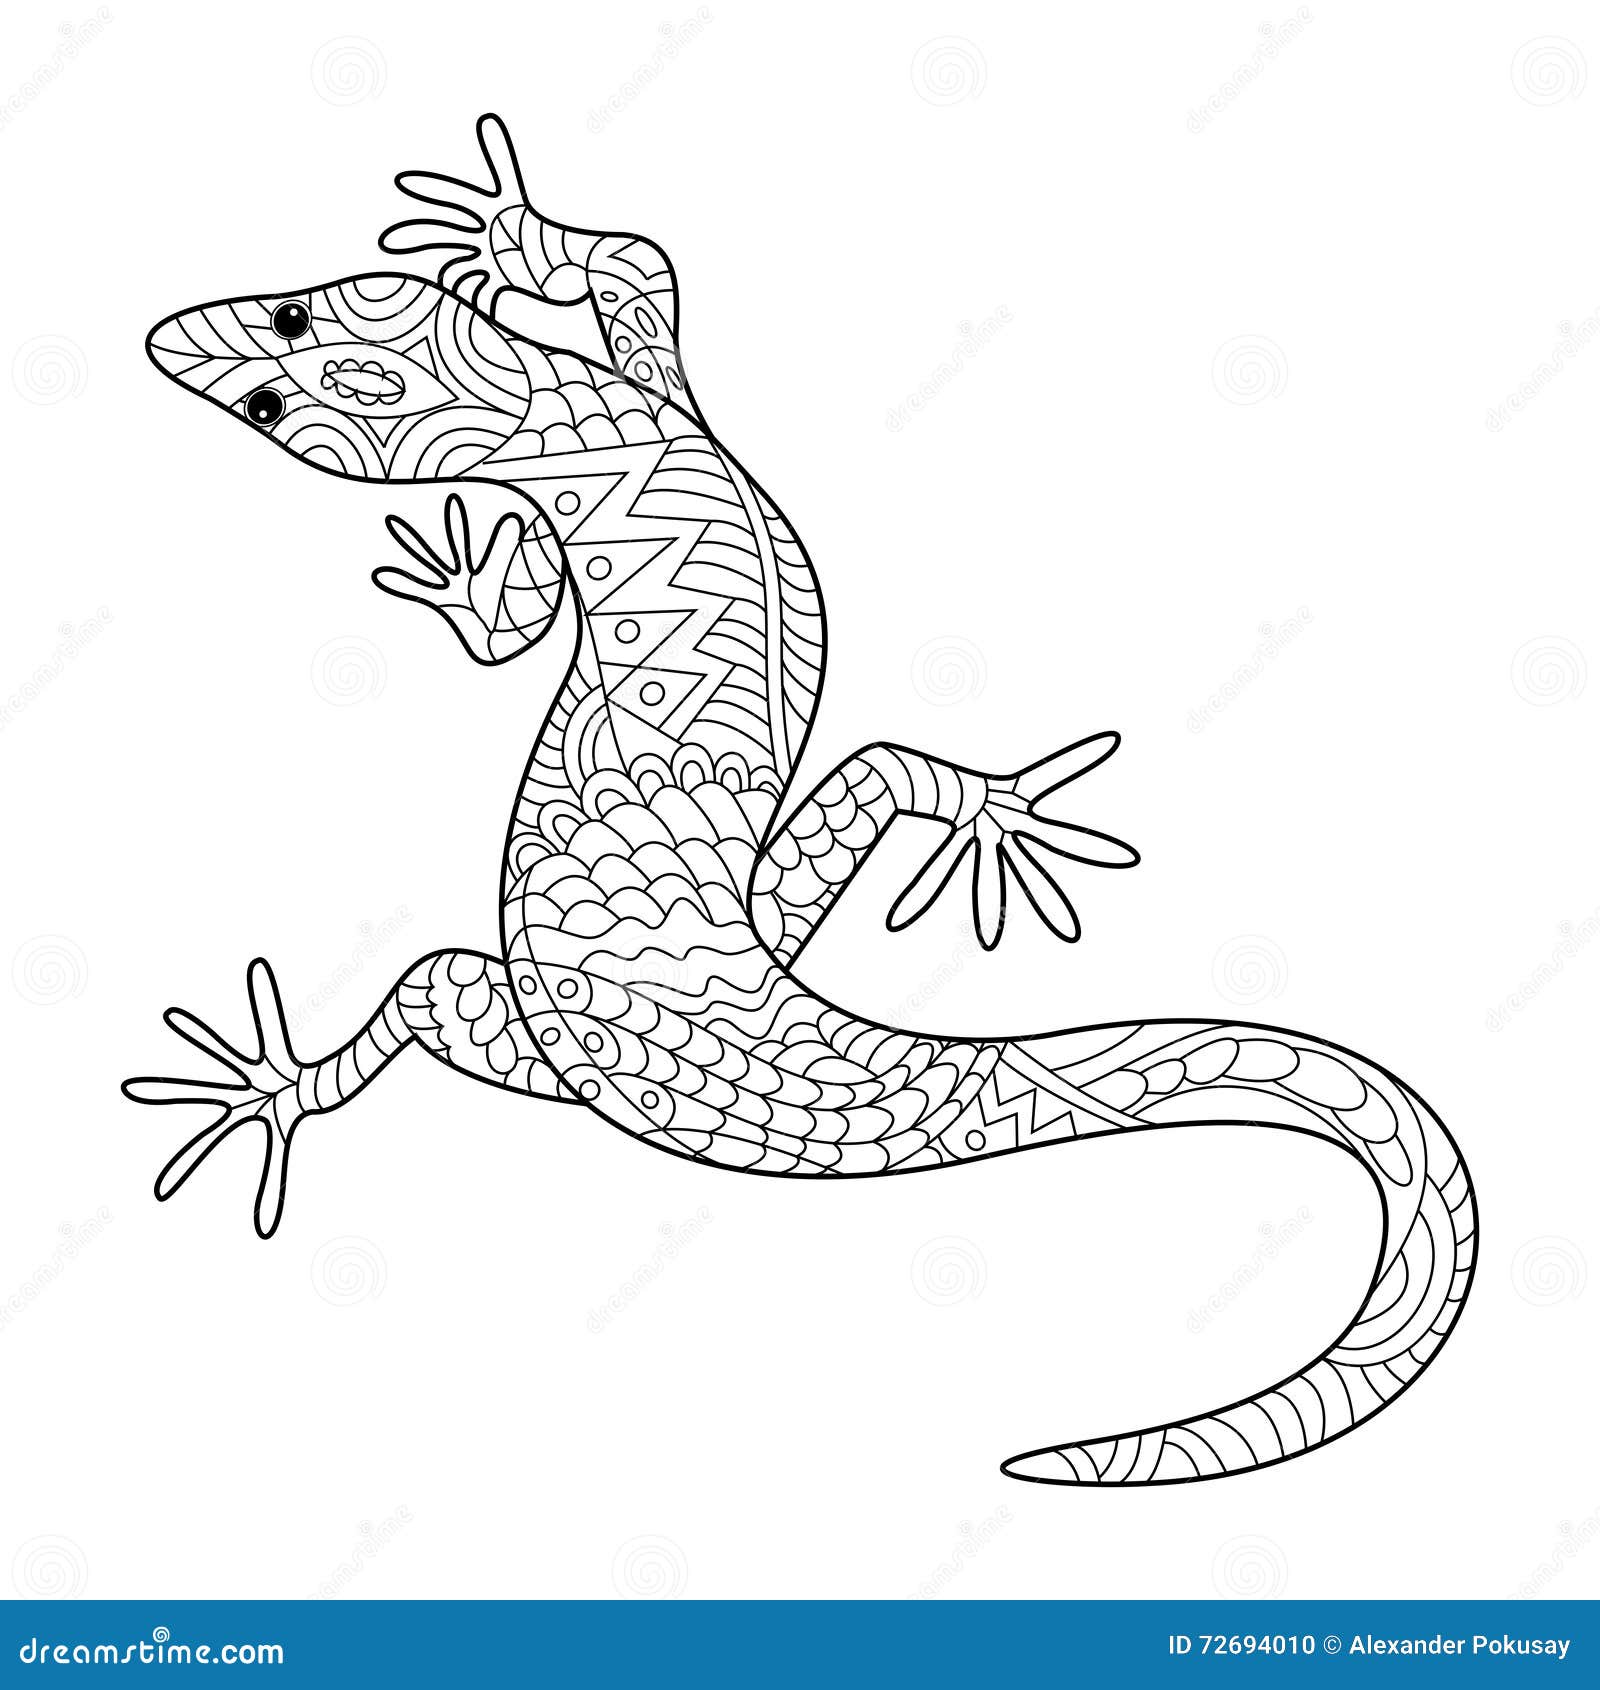 Lizard Coloring Book Adults Vector Stock Image 72694010 Royalty Free